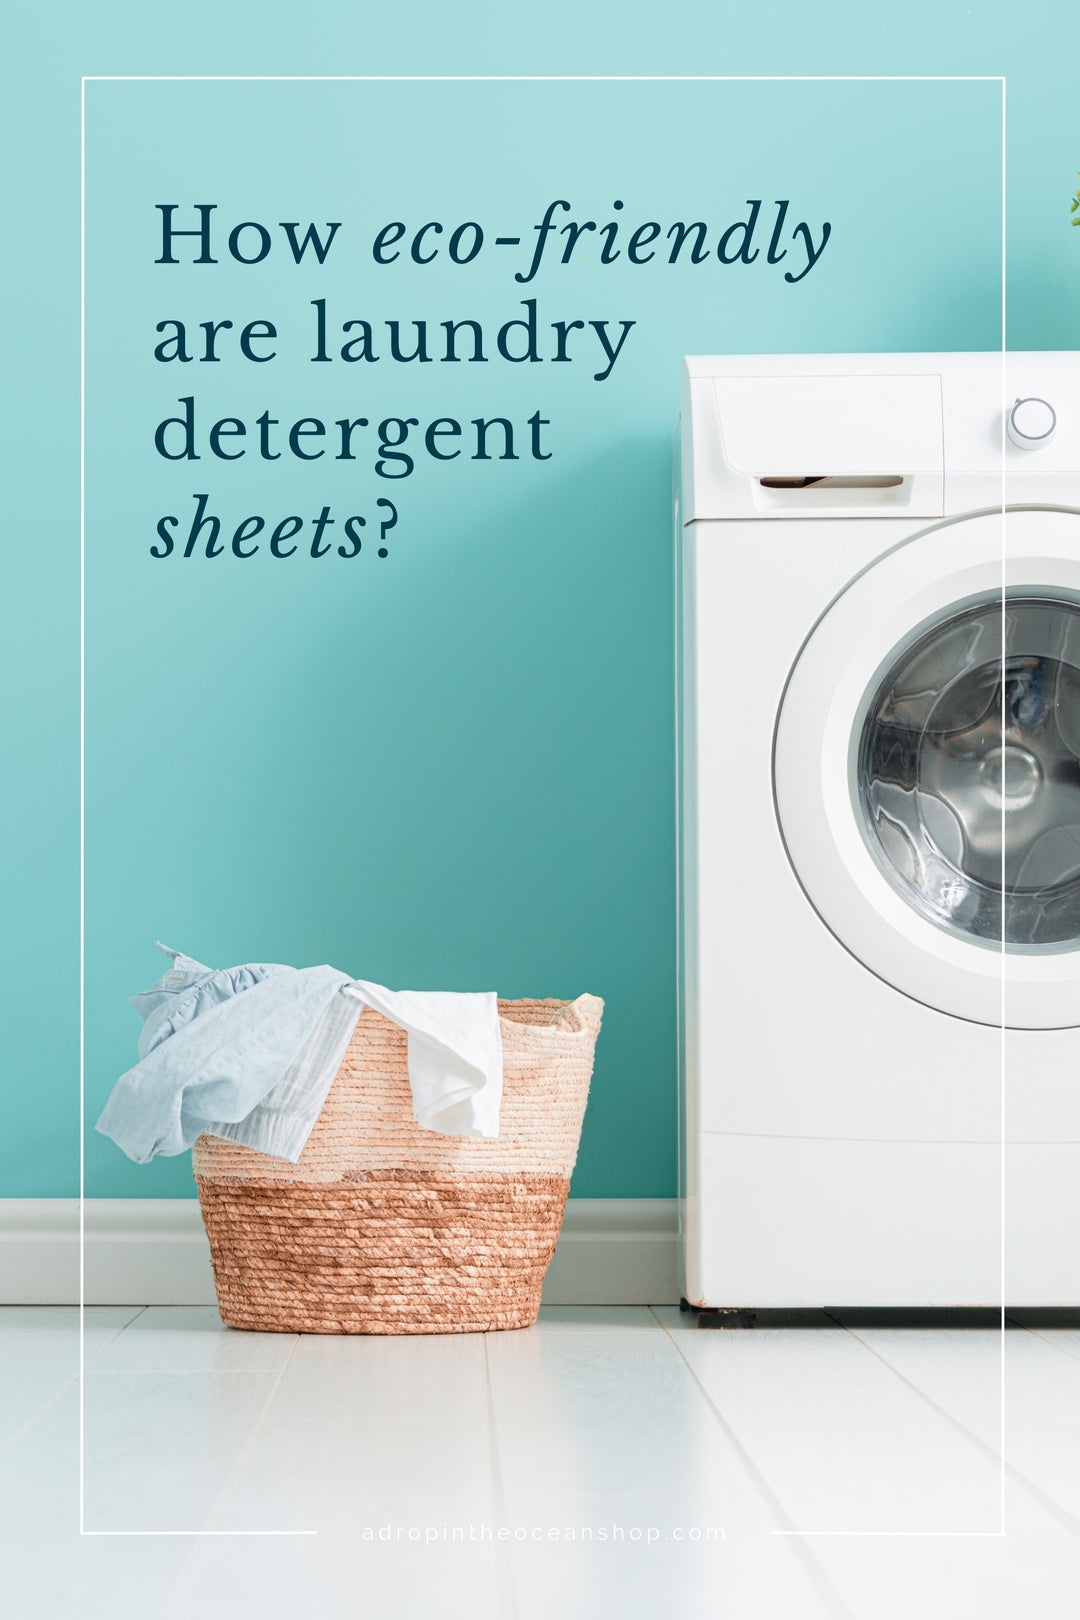 A Drop in the Ocean Zero Waste Store: How eco-friendly are laundry detergent sheets?